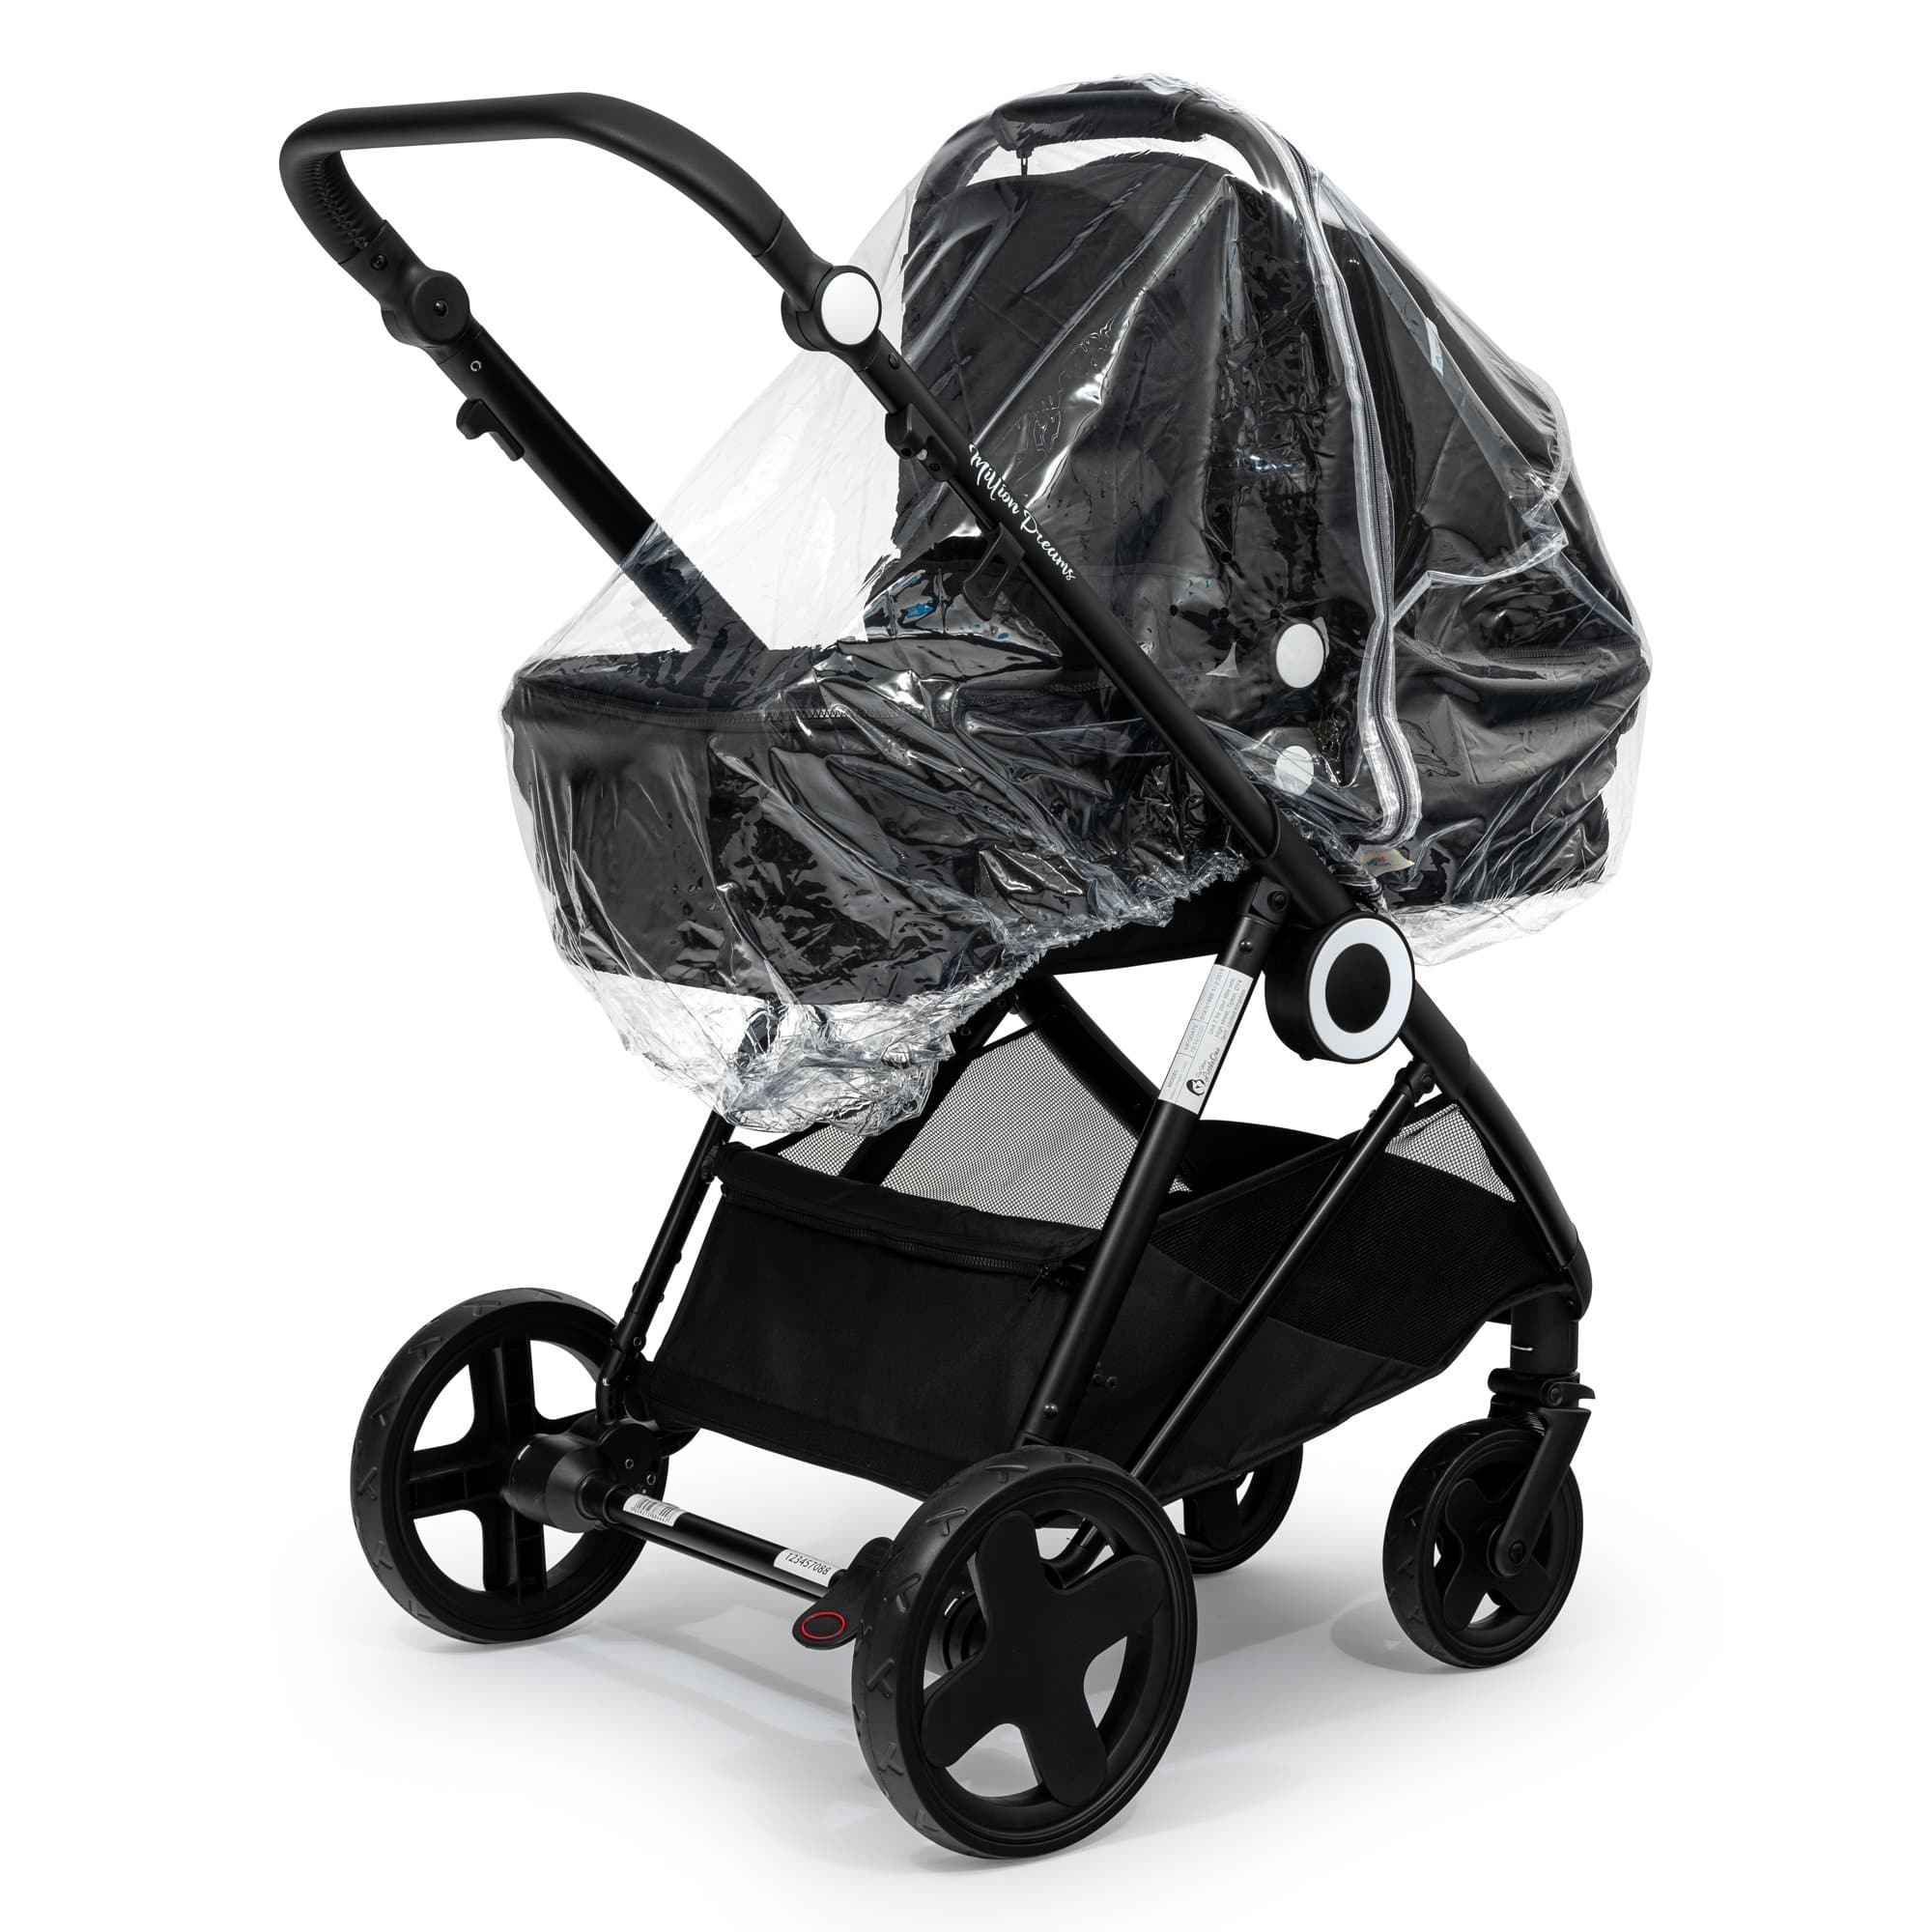 2 in 1 Rain Cover Compatible with BabyStyle - Fits All Models - For Your Little One